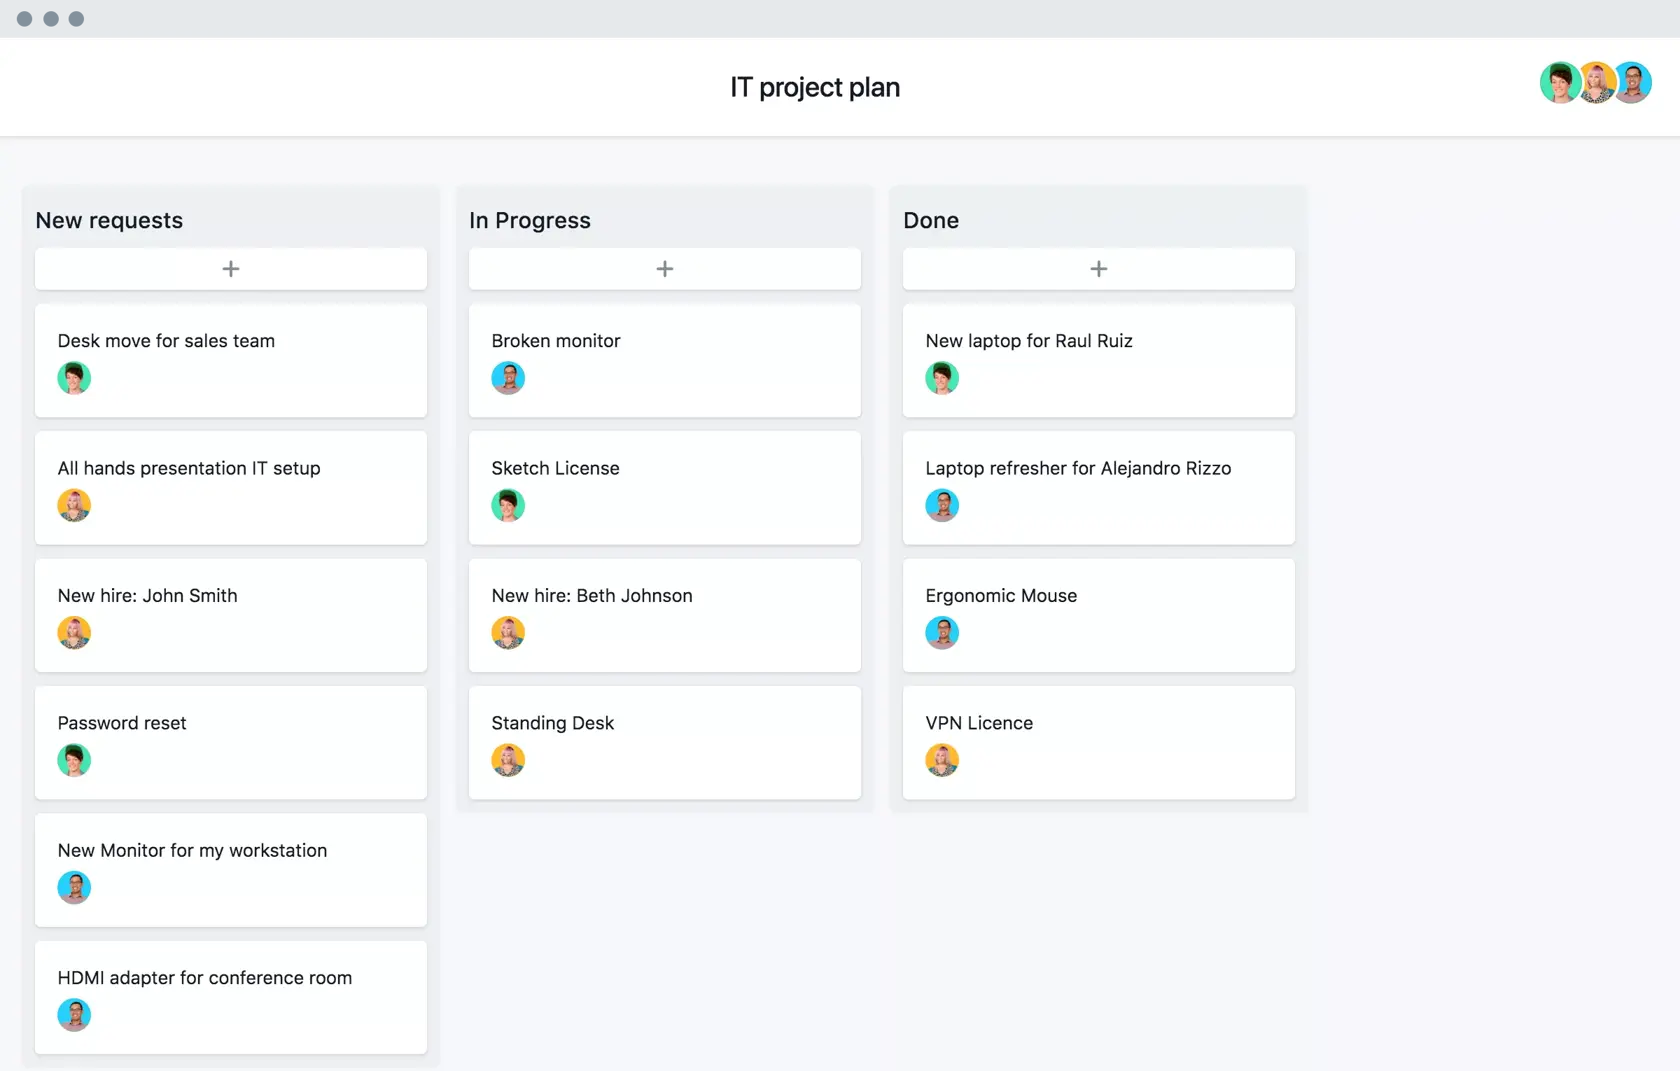 [Old product ui] IT project plan template in Asana, Kanban board style view (Boards)